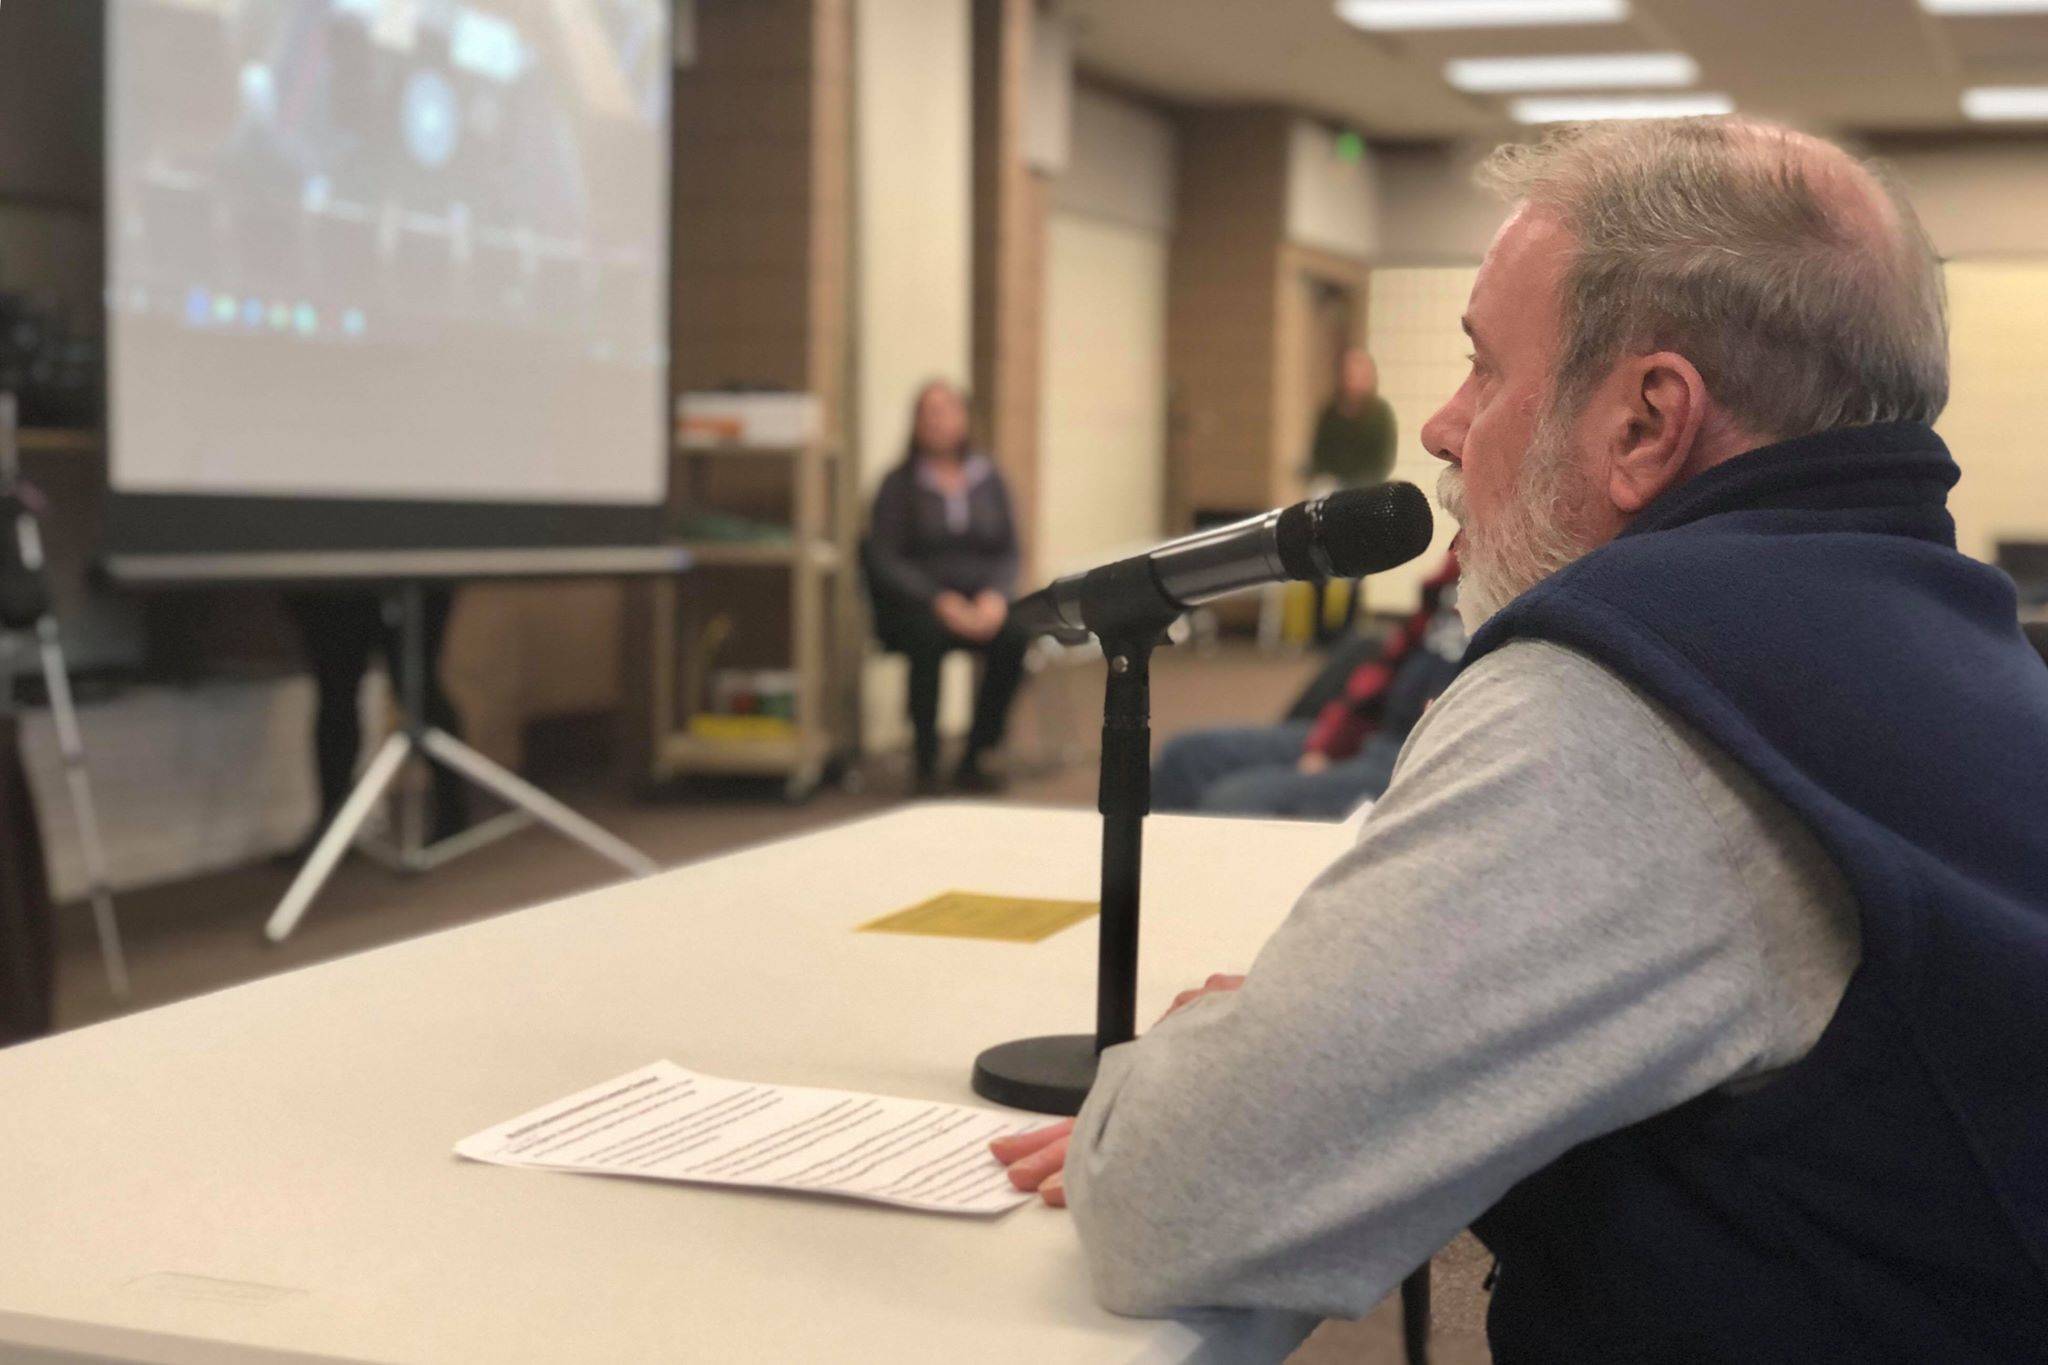 Kenai Peninsula College Director Gary Turner speaks to the House Finance Committee members in against cuts to the University of Alaska on Saturday, March 23, 2019, at the Soldotna Regional Sports Complex in Soldotna, Alaska. (Photo by Victoria Petersen/Peninsula Clarion)